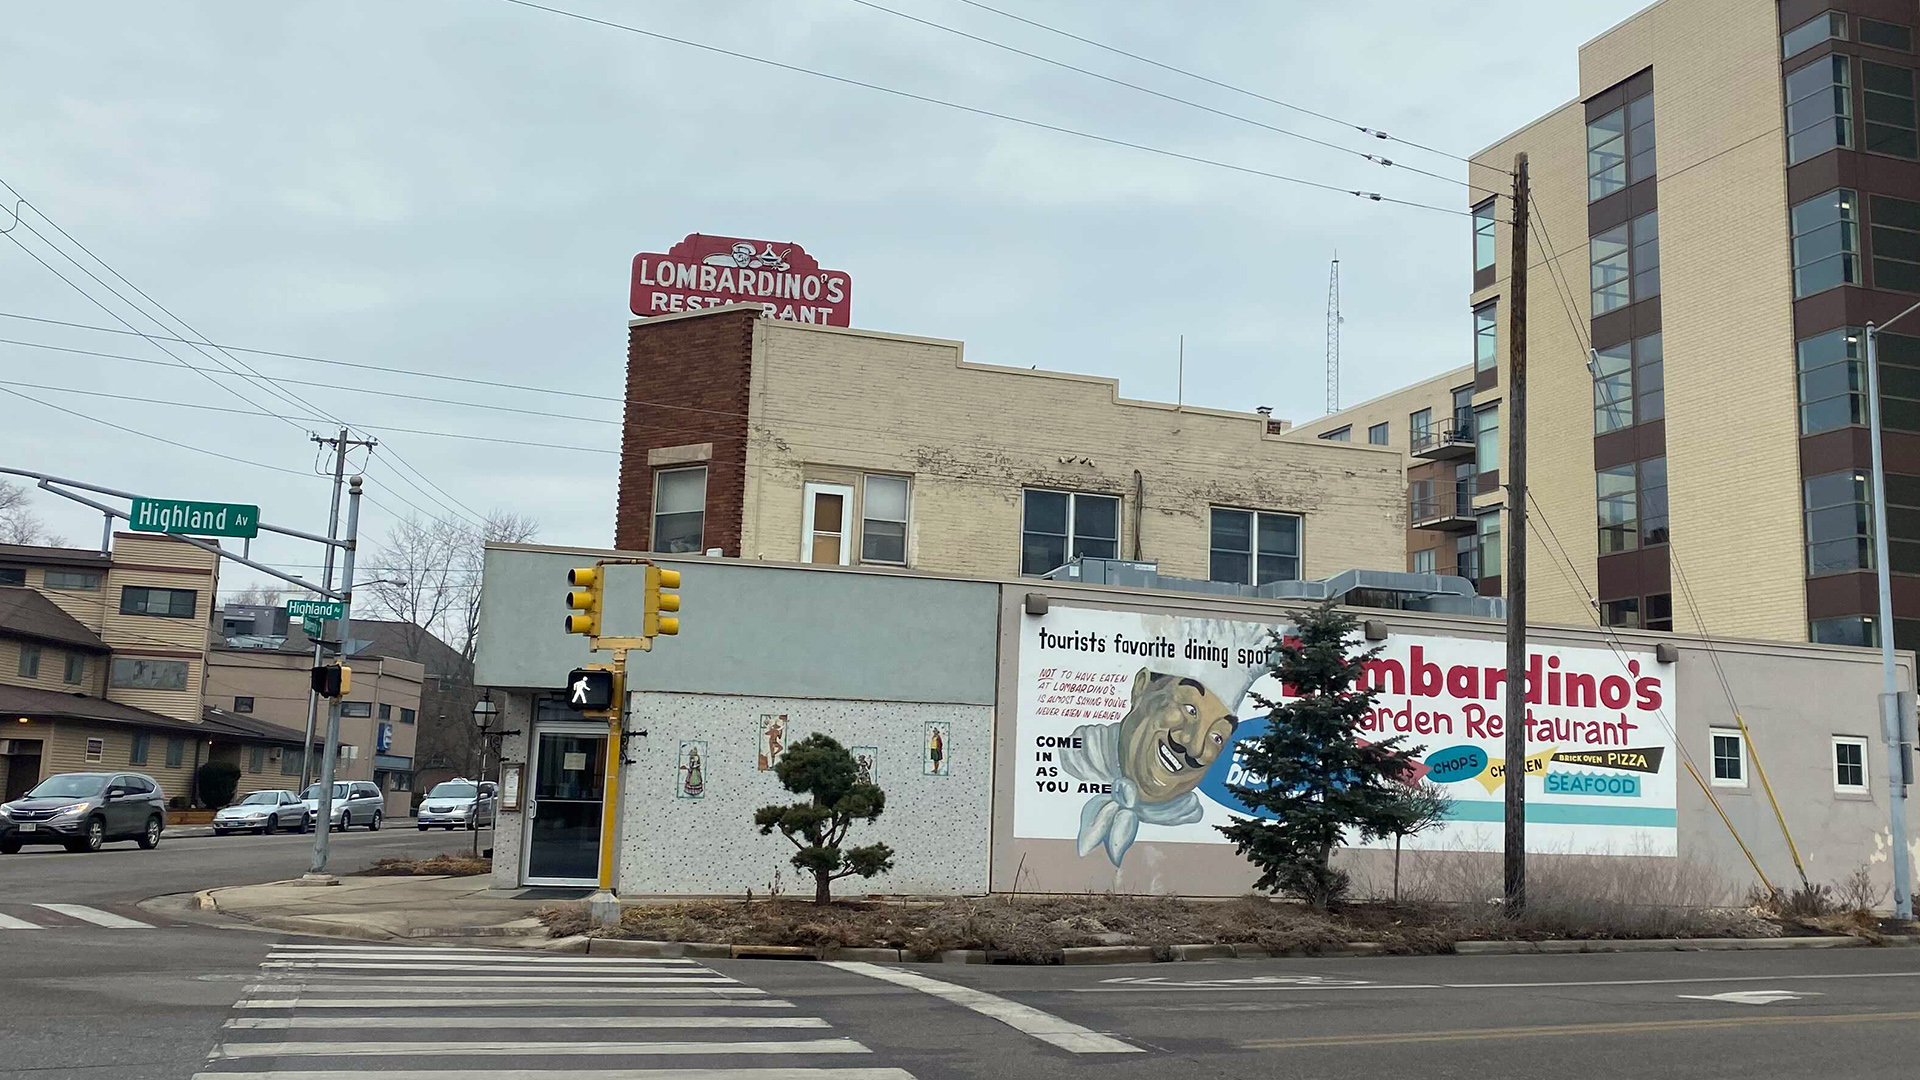 A mural advertising "Lombardino's Garden Restaurant" is painted on the side of a low-slung building, with taller buildings standing in the background and cars driving on the adjacent street.